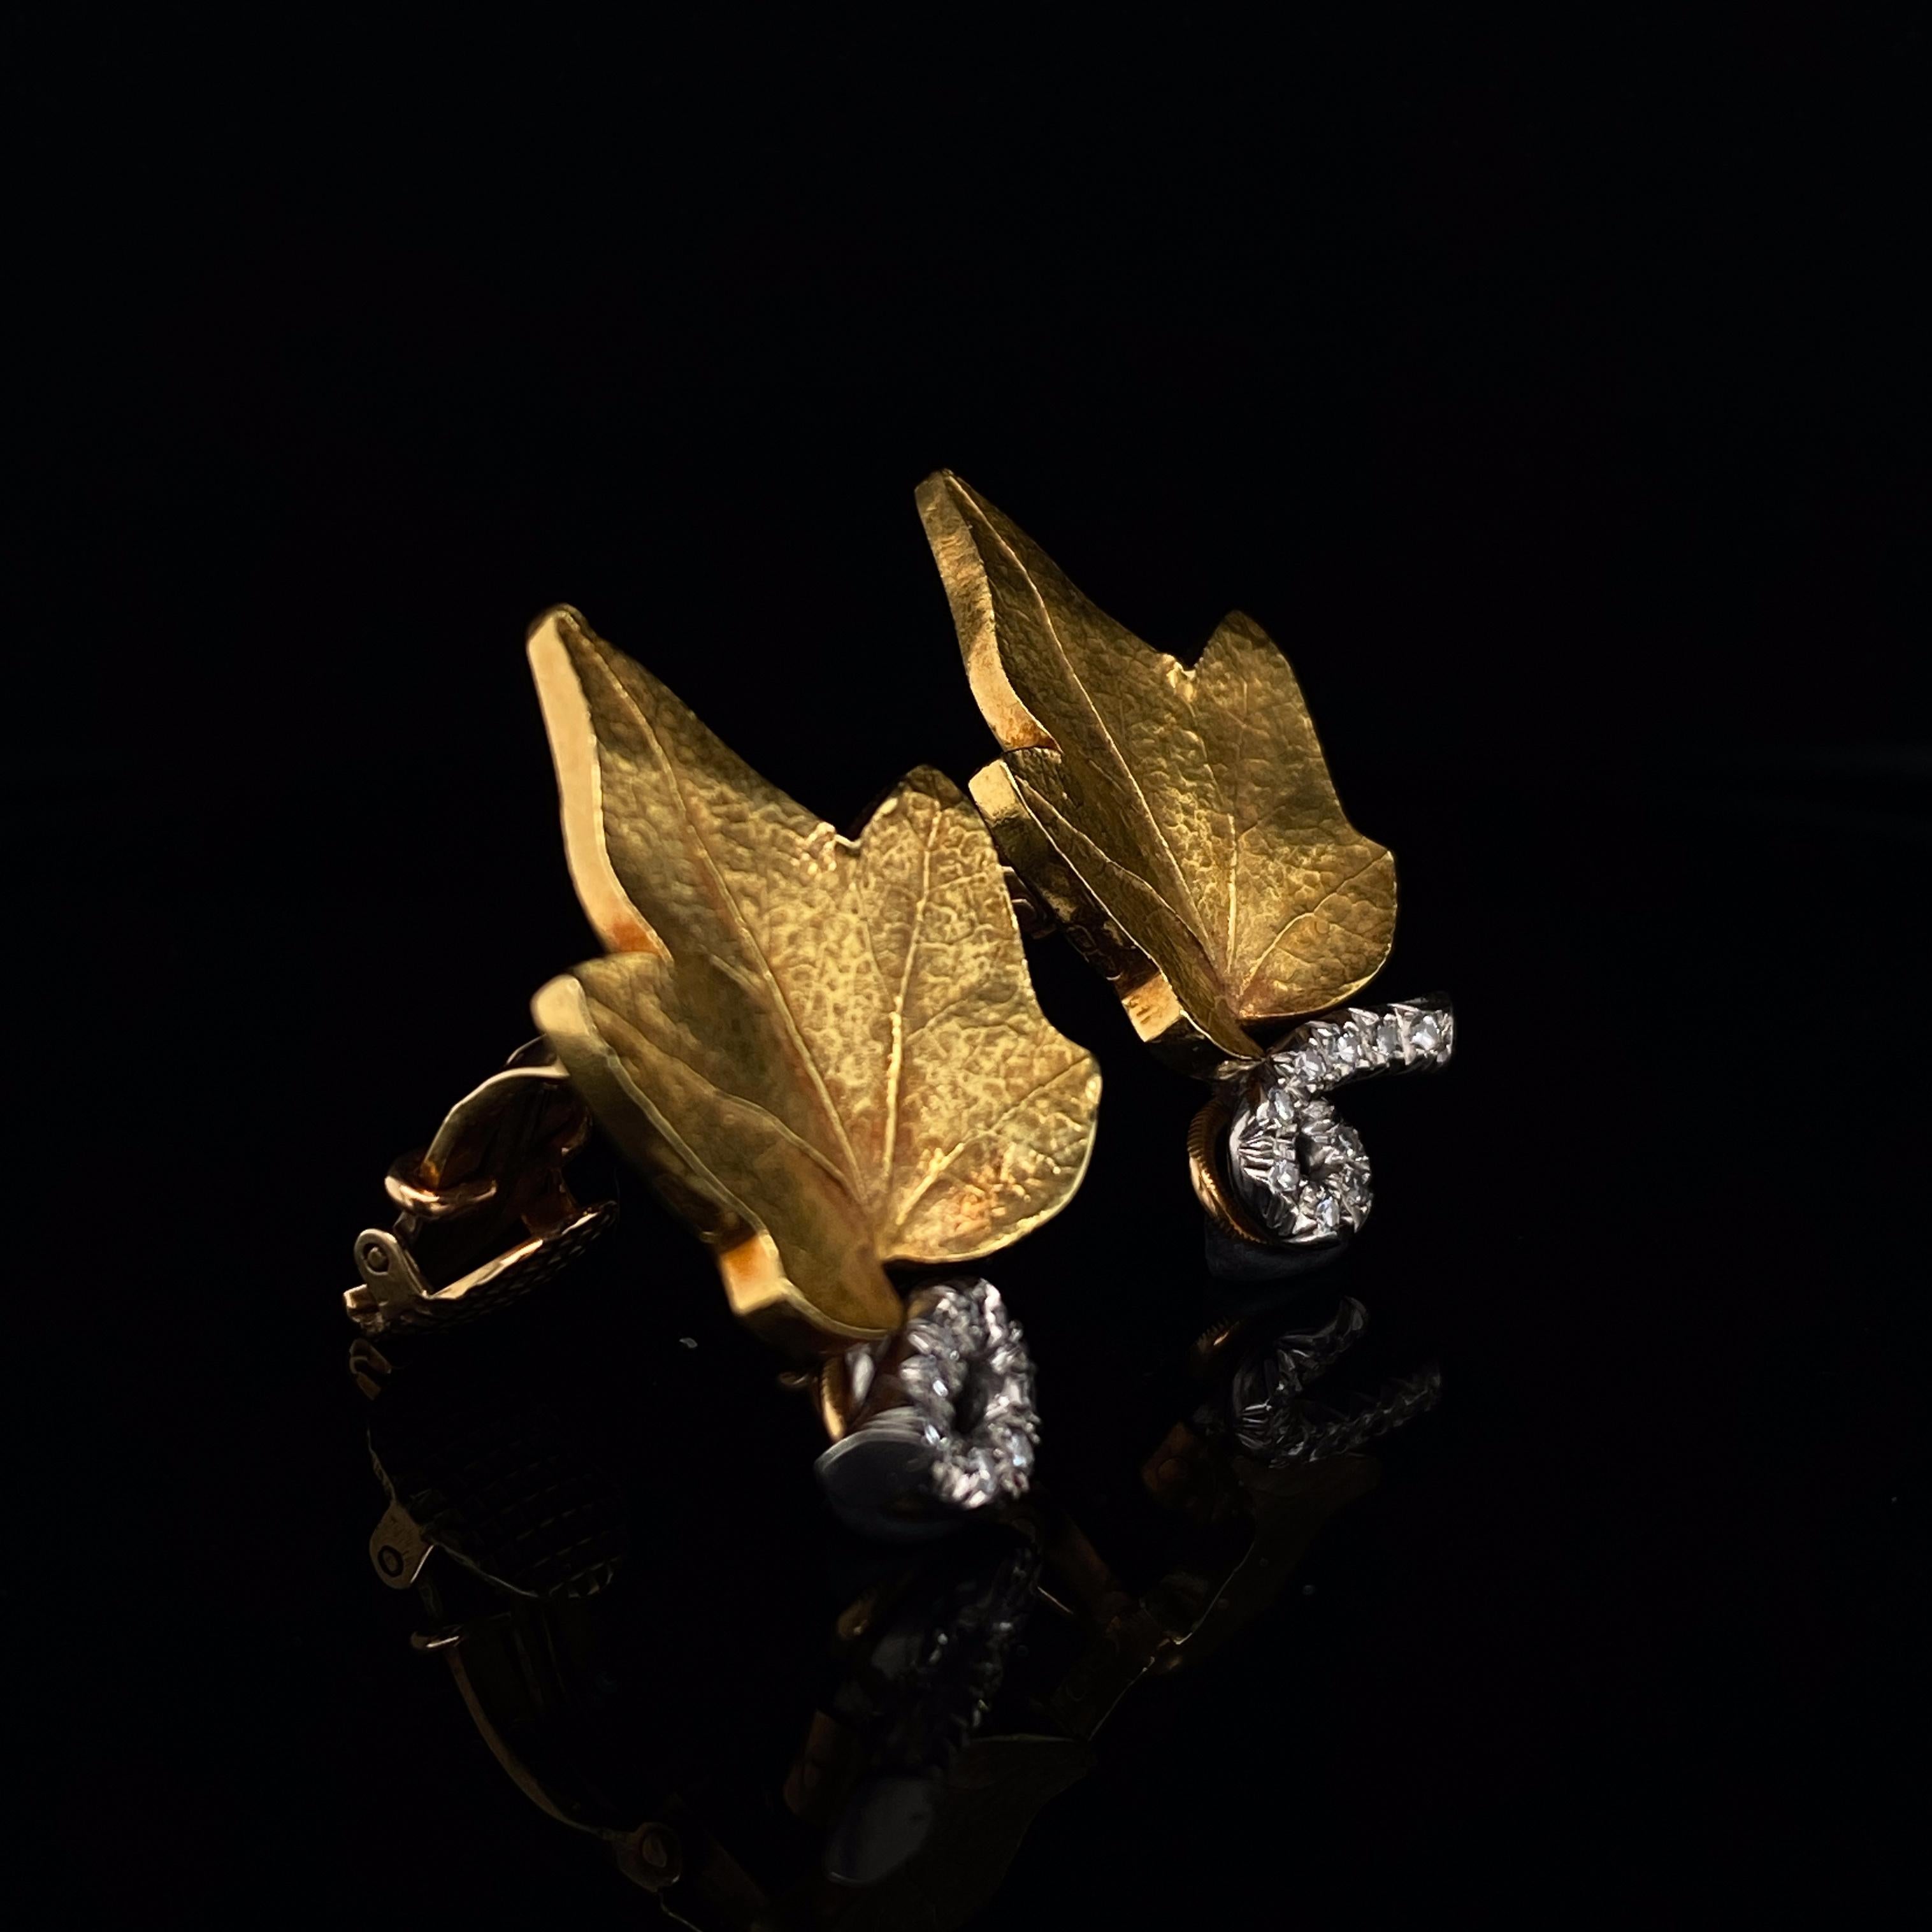 A wonderfully rare pair of Cartier Diamond Set Yellow Gold Retro Leaf Design Earrings circa 1950.

The leaves are worked in 14 Karat yellow gold and are exquisitely detailed with delicate veining against a softly bloomed matte finish. The stems are